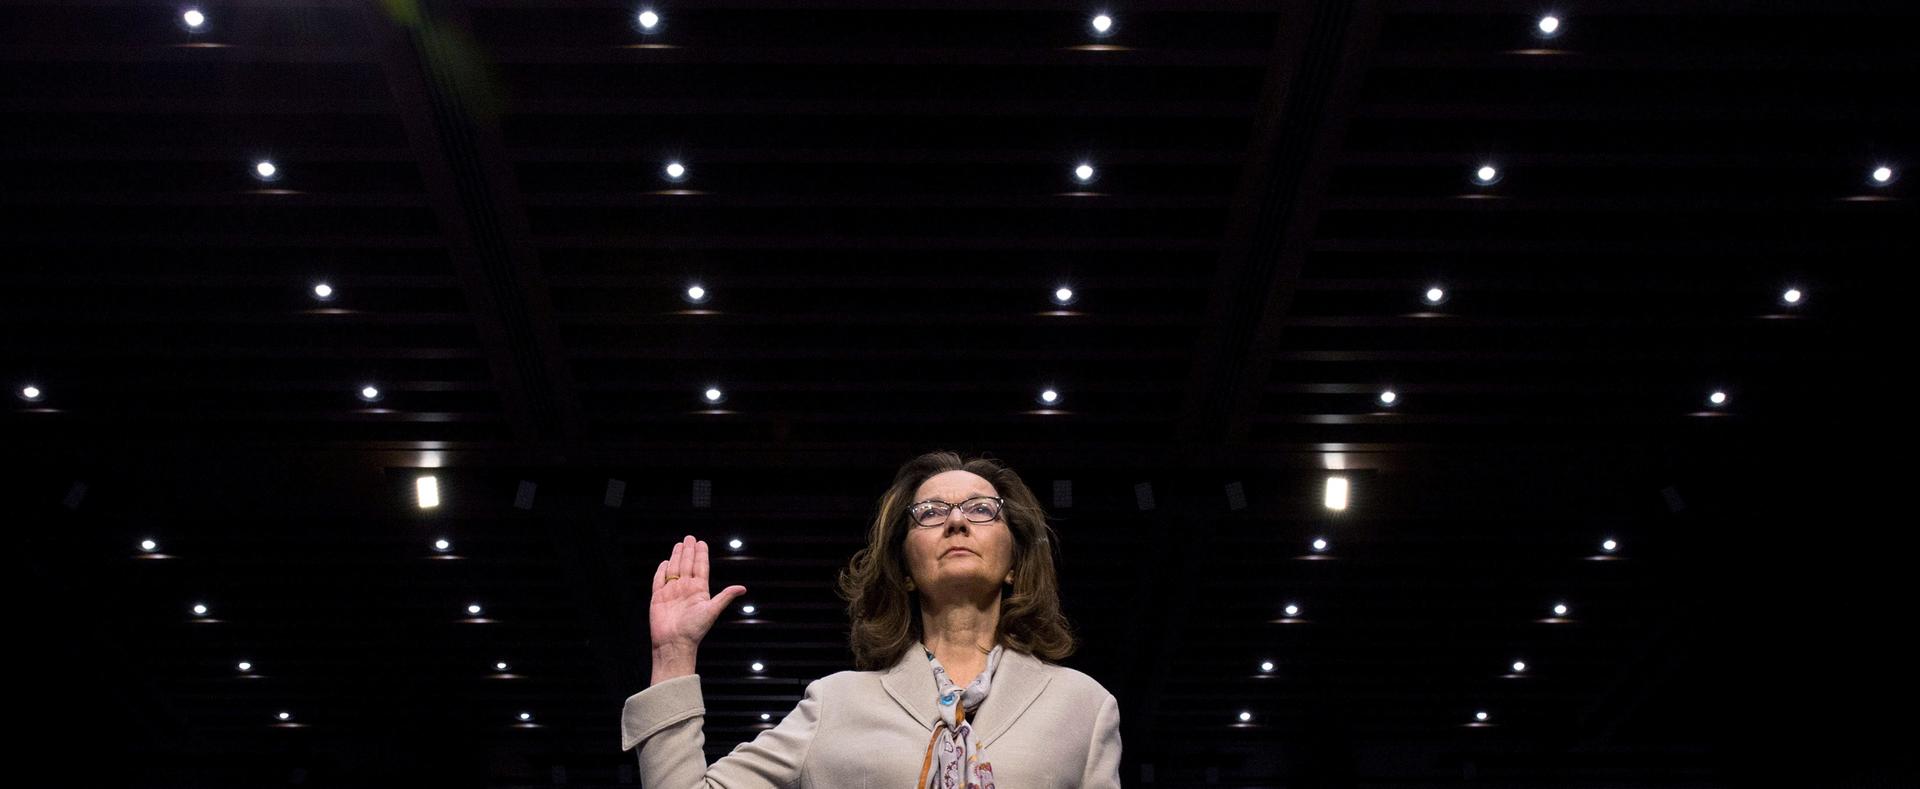 CIA director nominee and acting CIA Director Gina Haspel is sworn in to testify at her Senate Intelligence Committee confirmation hearing on Capitol Hill,